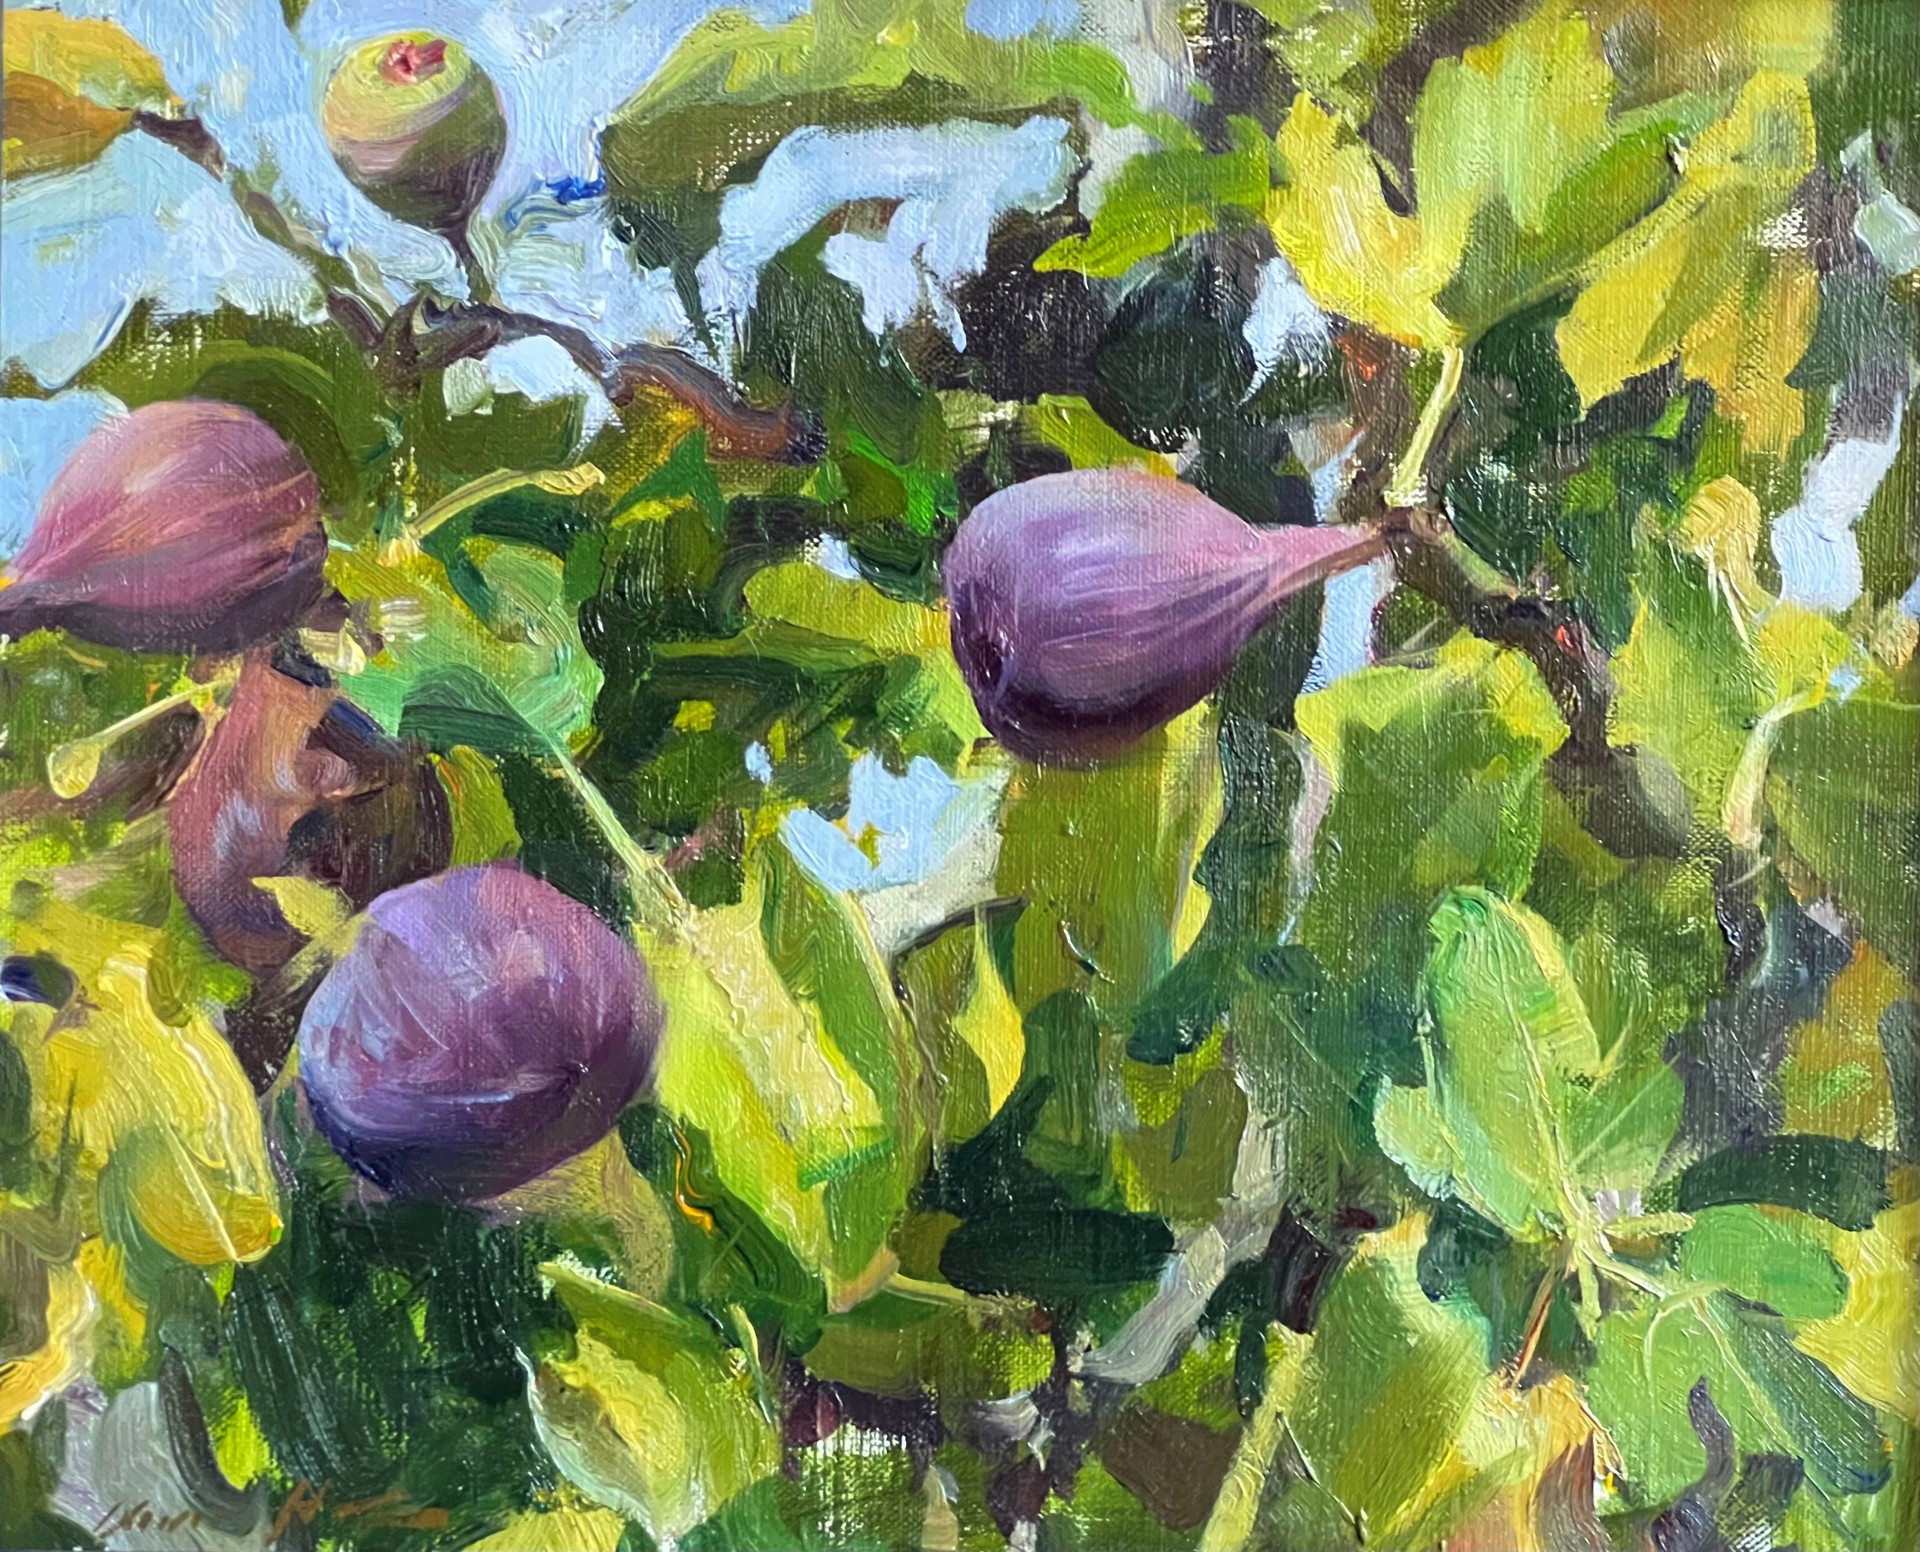 Figs by Quang Ho